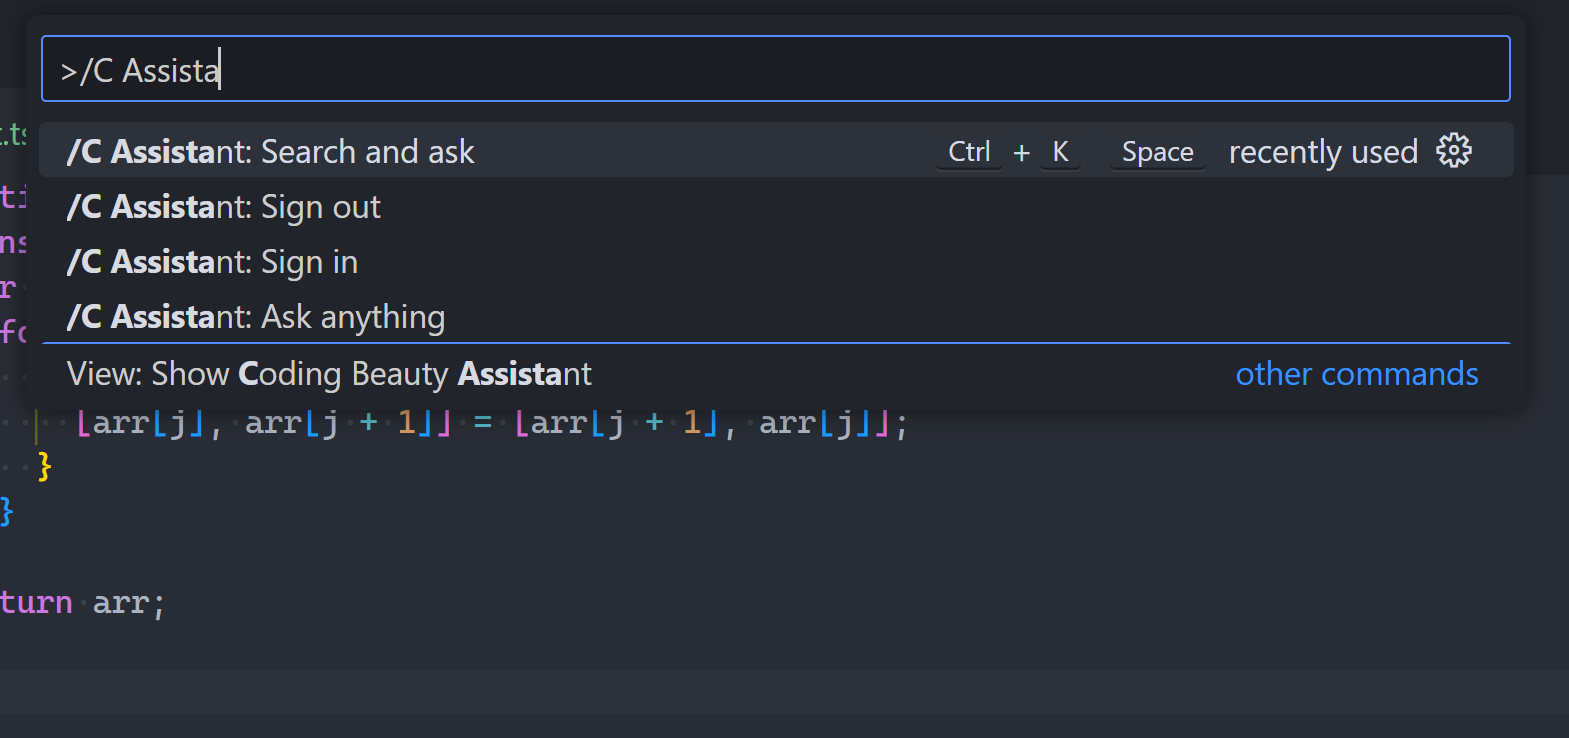 Coding Beauty Assistant Search and Ask command